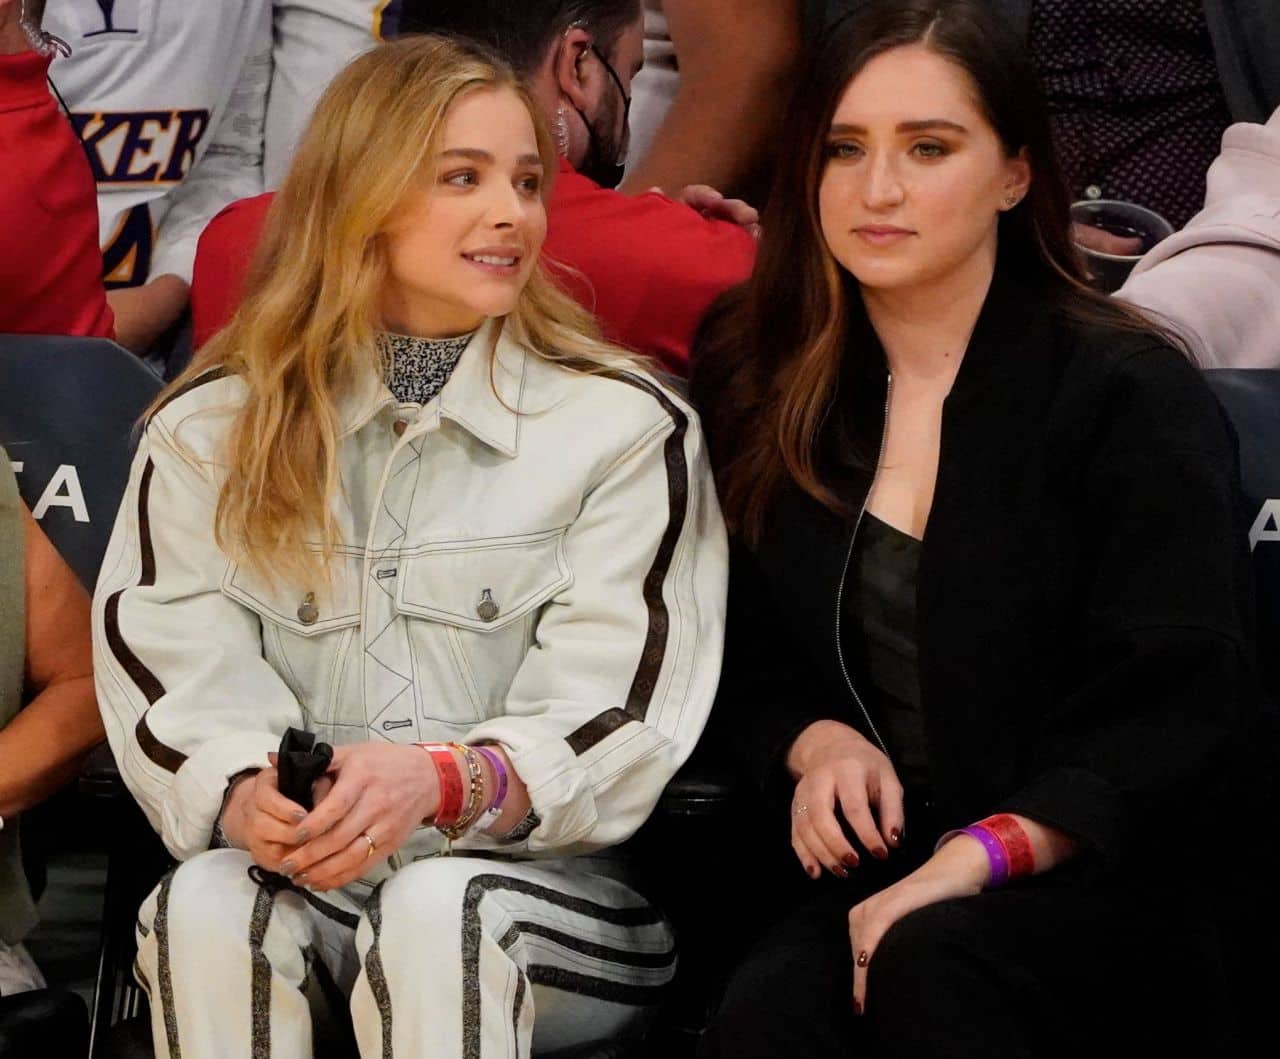 Chloe Grace Moretz in the Retro-inspired Outfit at a Lakers vs. Magic Game